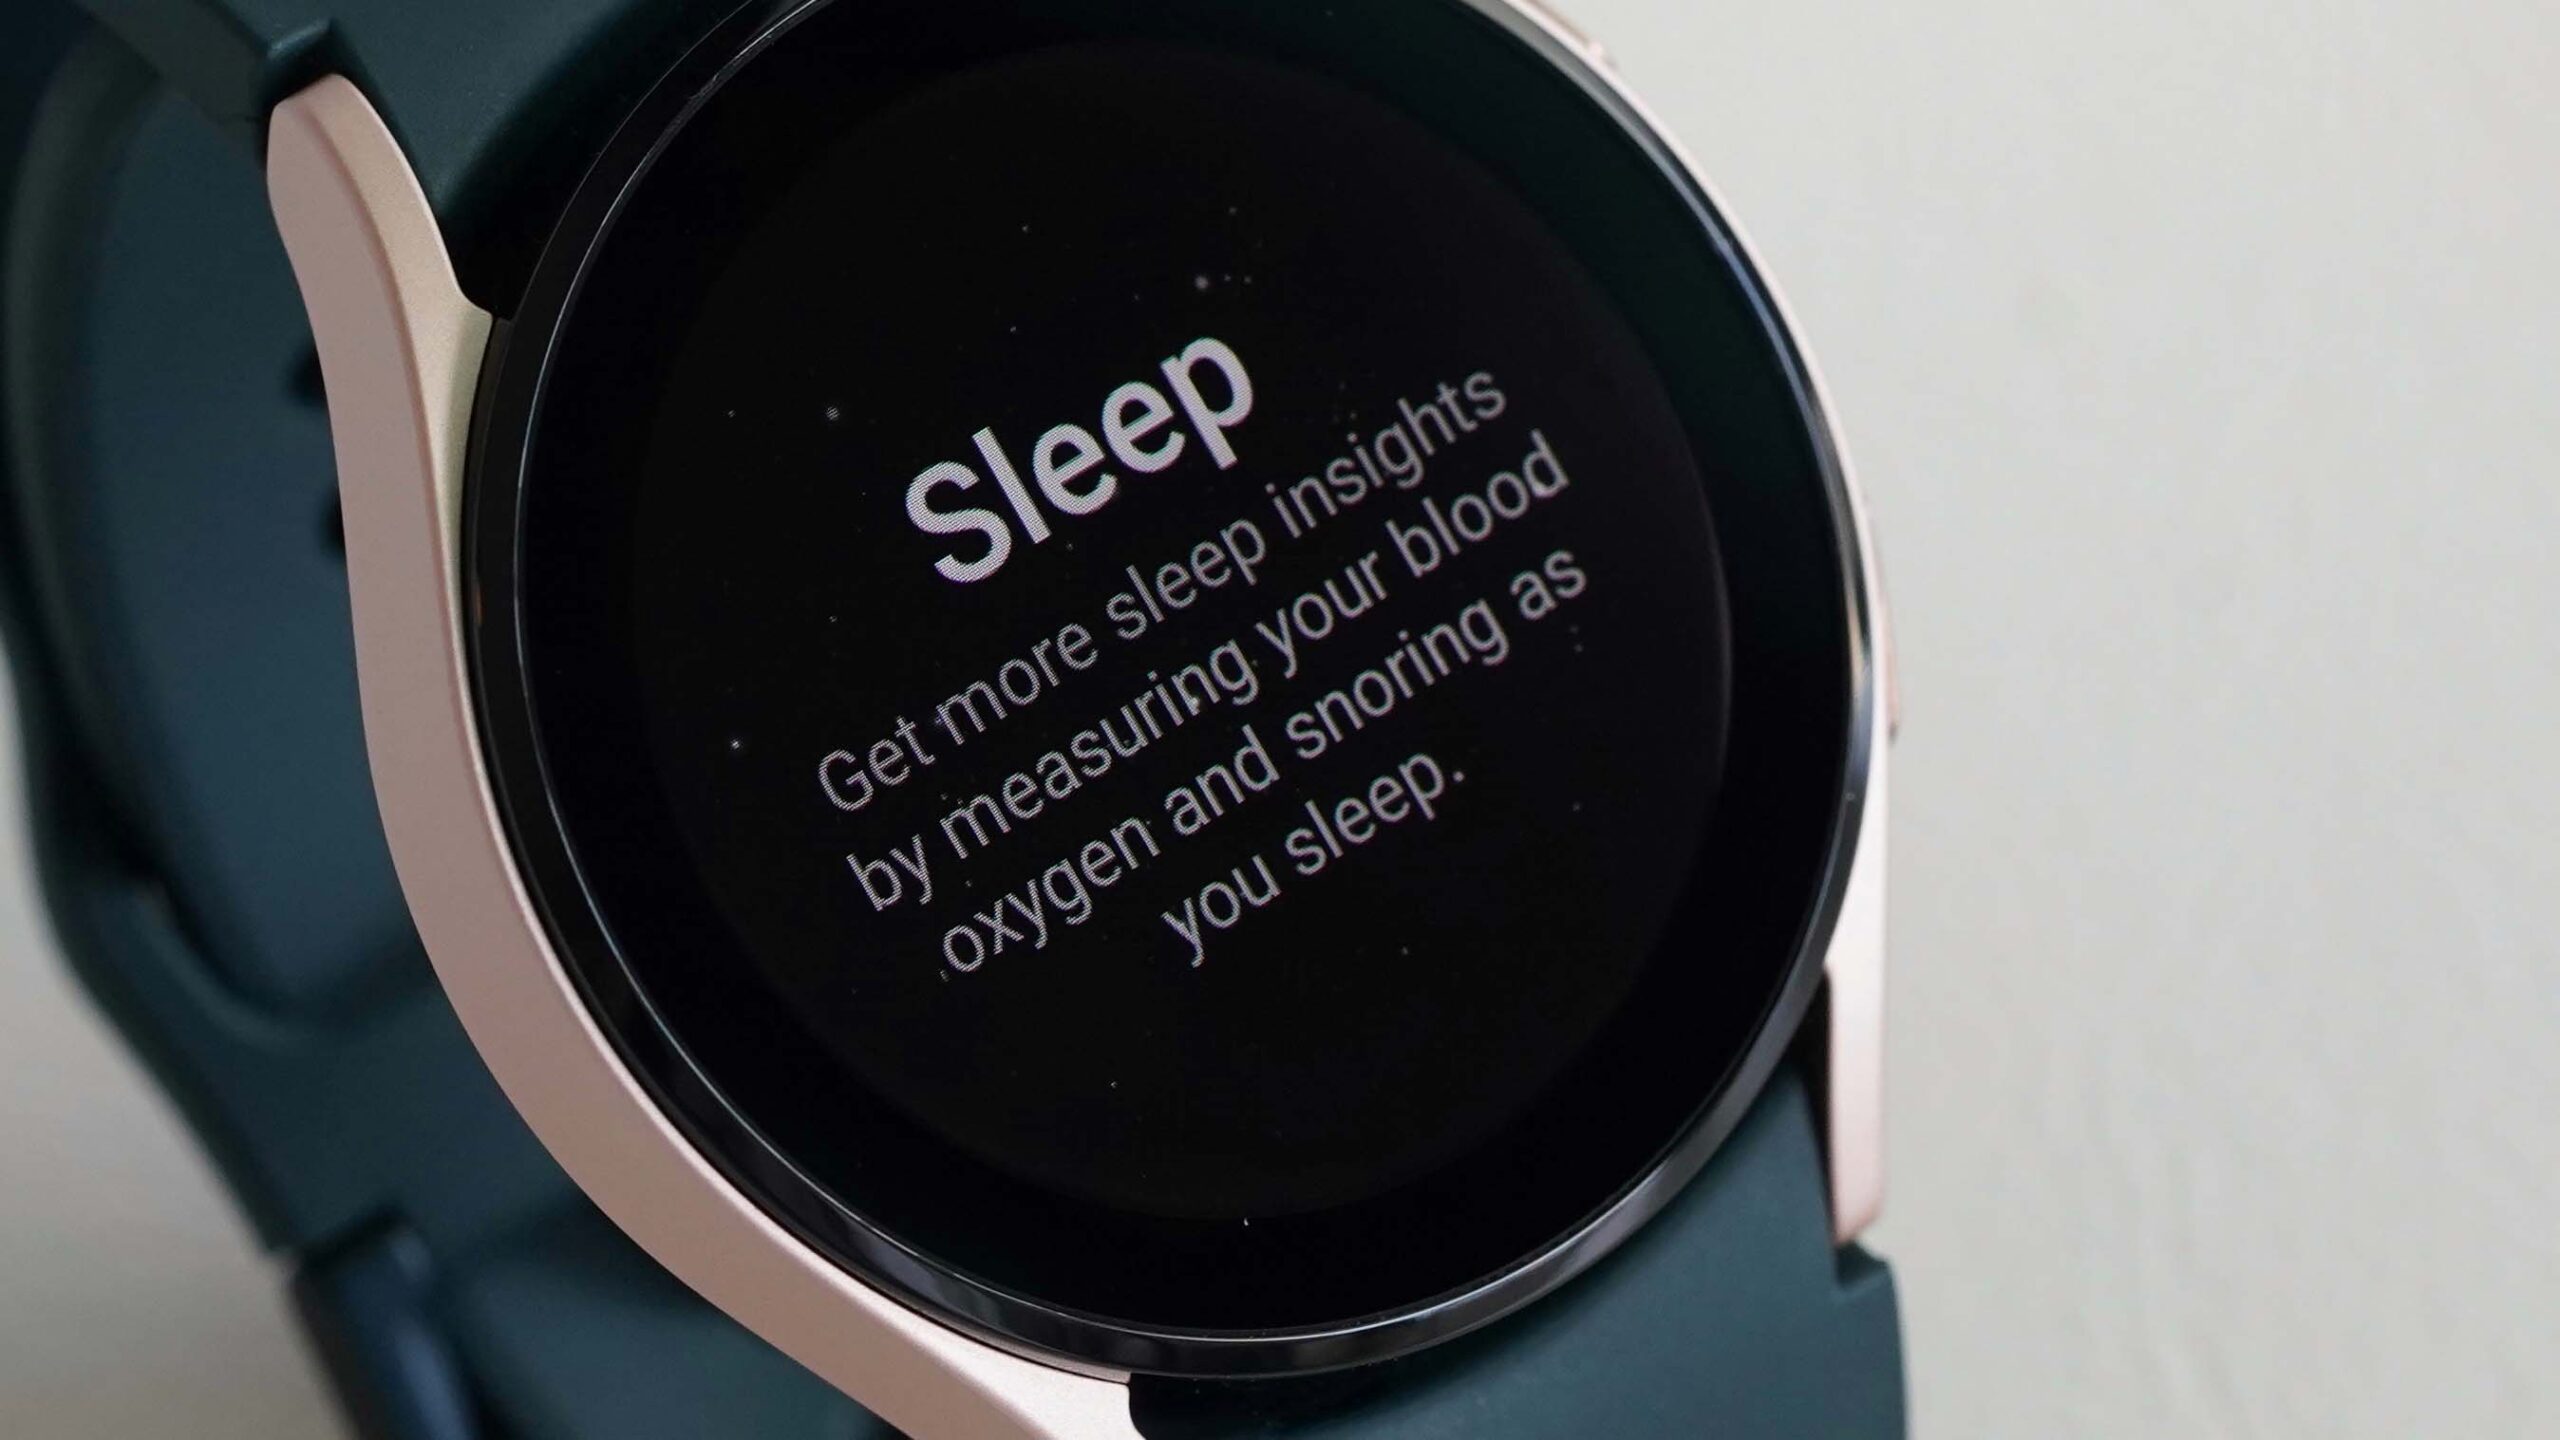 Galaxy Watch 4 rests on a white leather surface displaying information about the device's sleep tracking capabilities.